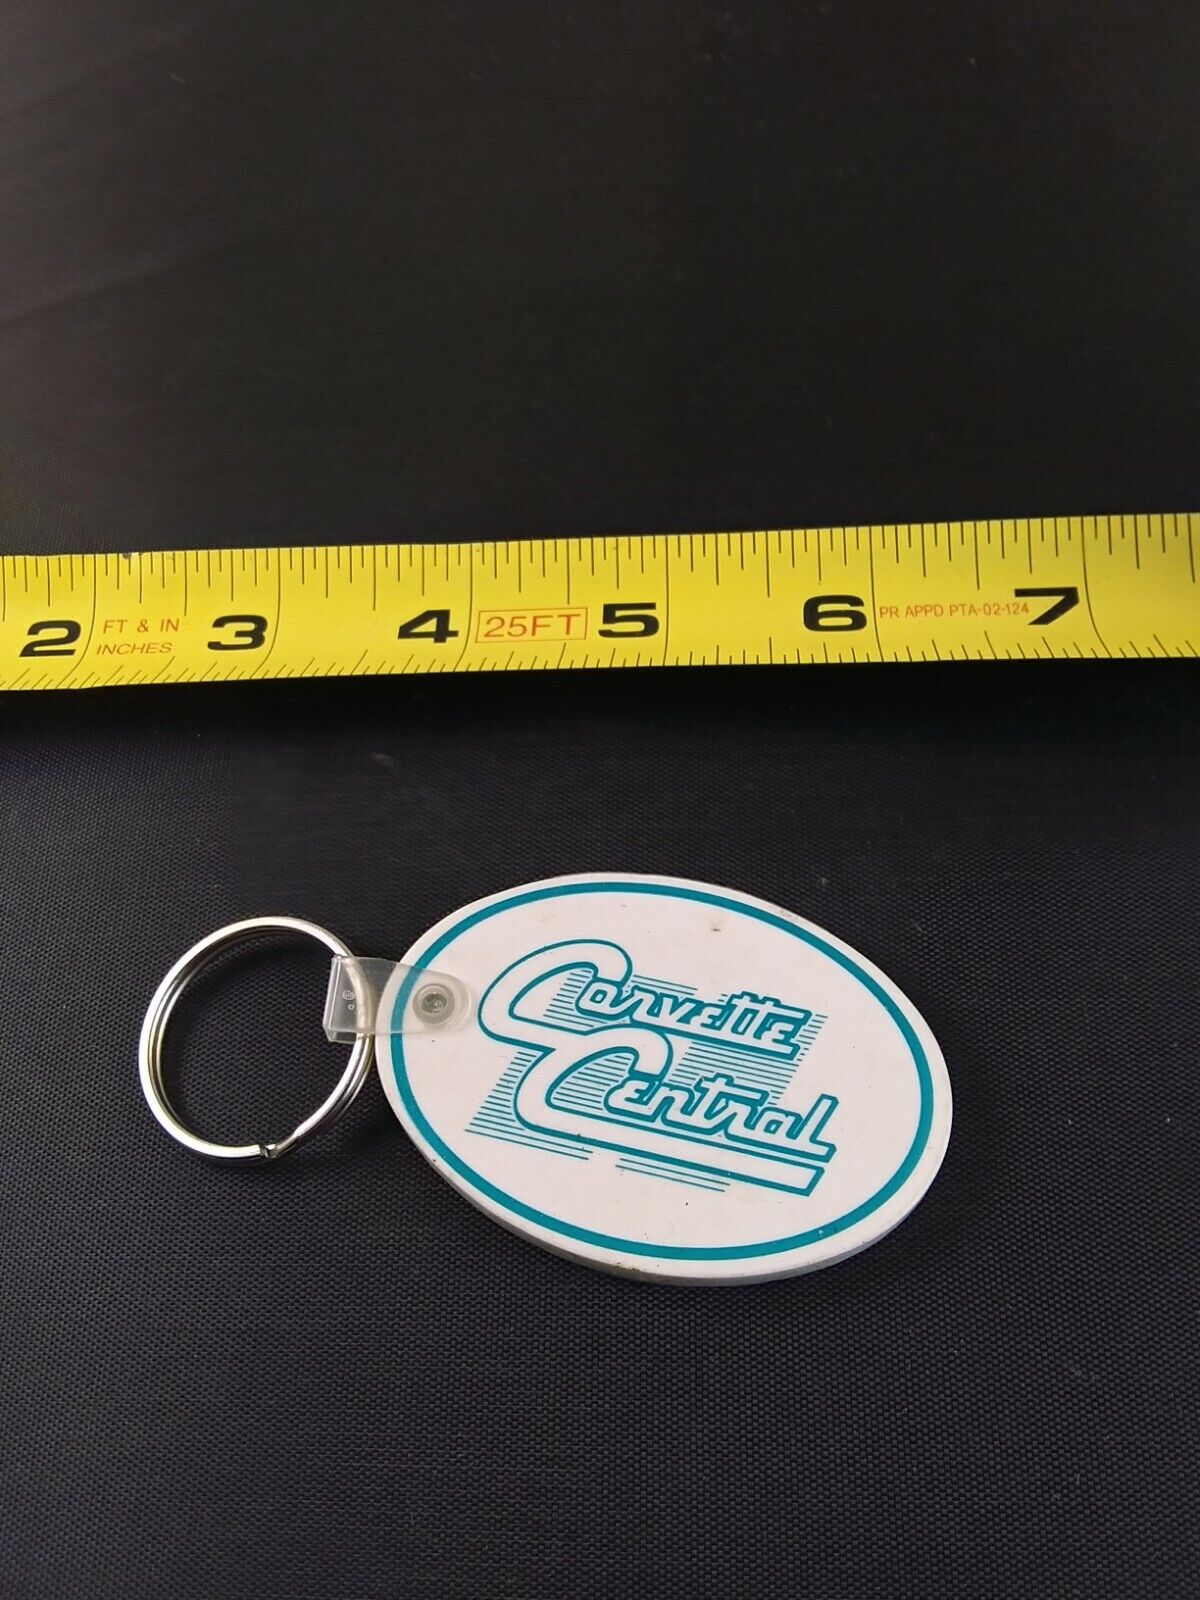 Vintage Corvette Central Parts Keychain Key Ring Chain Style Hangtag Fob *109-F